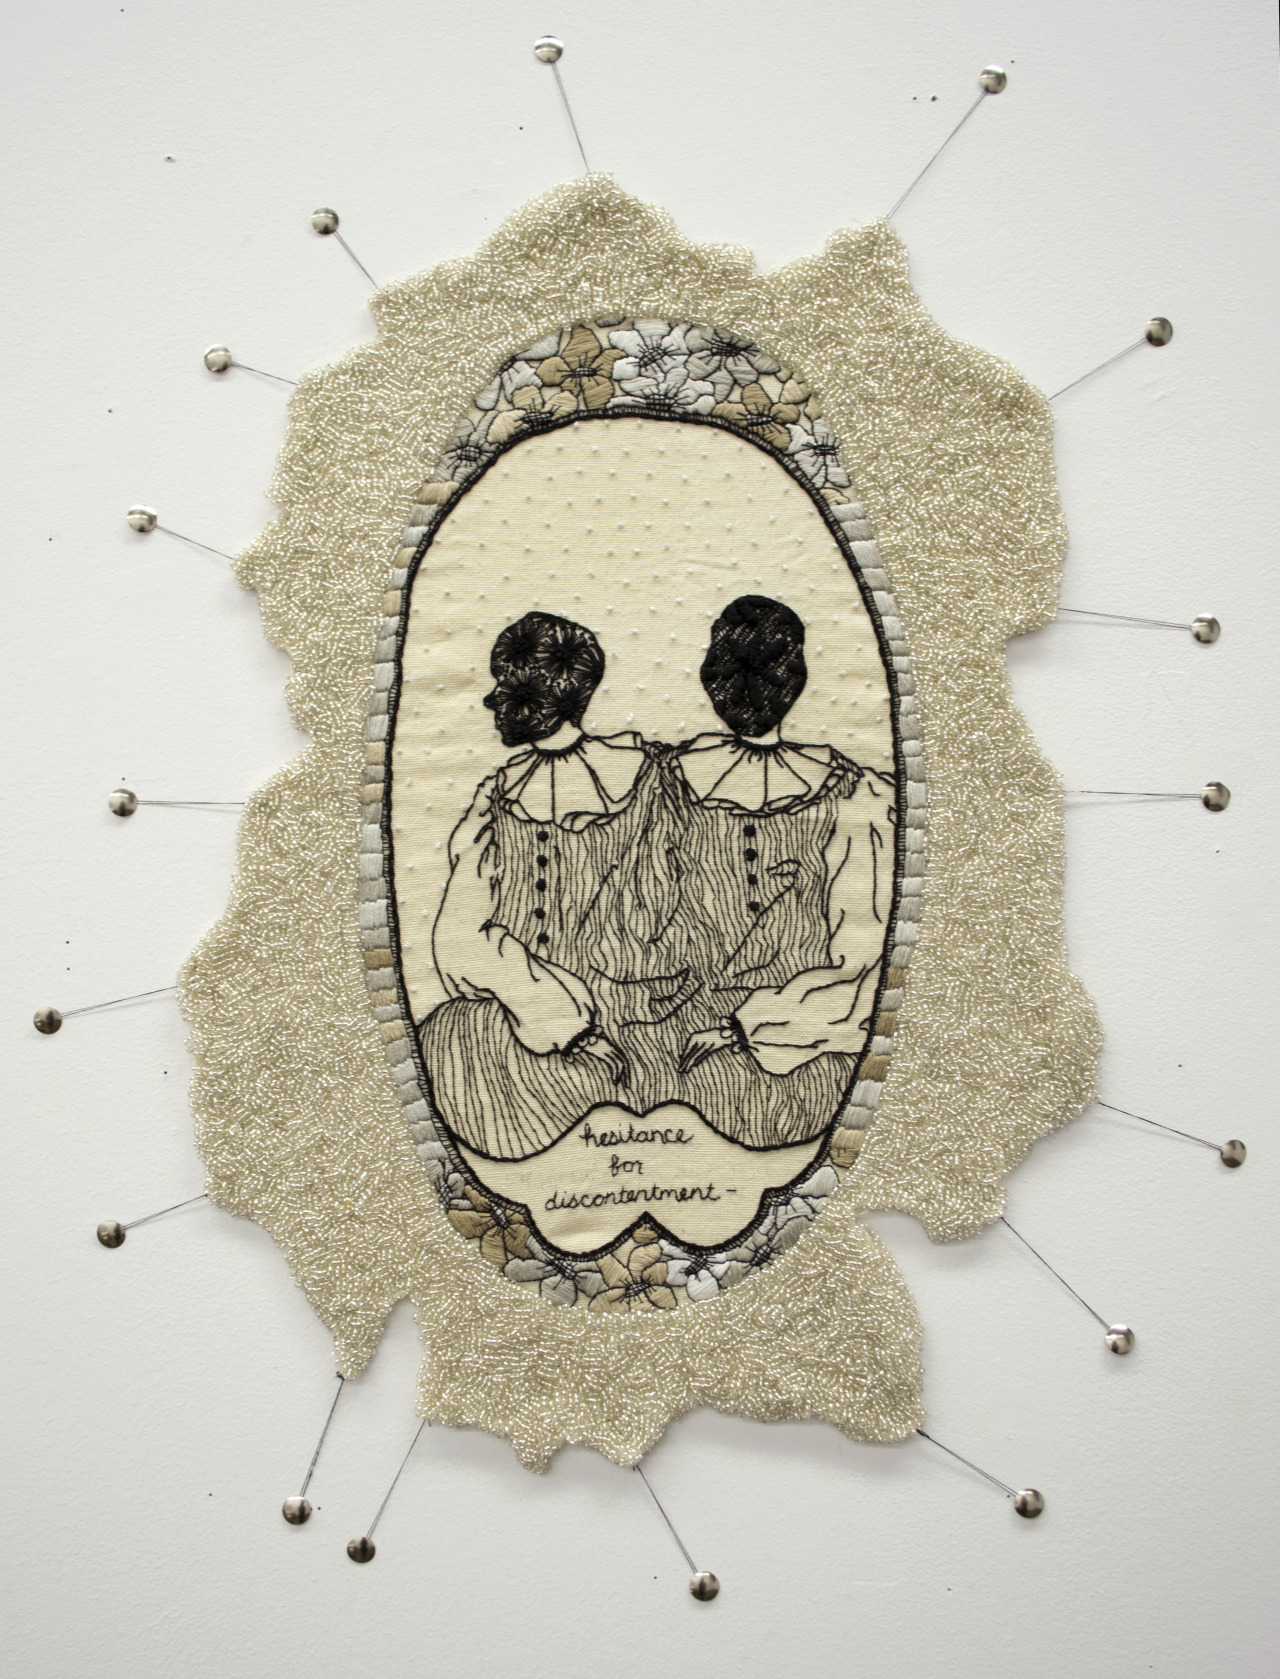 Kathryn Shriver, Hesitance for Discontentment (2014). Hand beading and embroidery on canvas.
http://kathryneulella.tumblr.com/